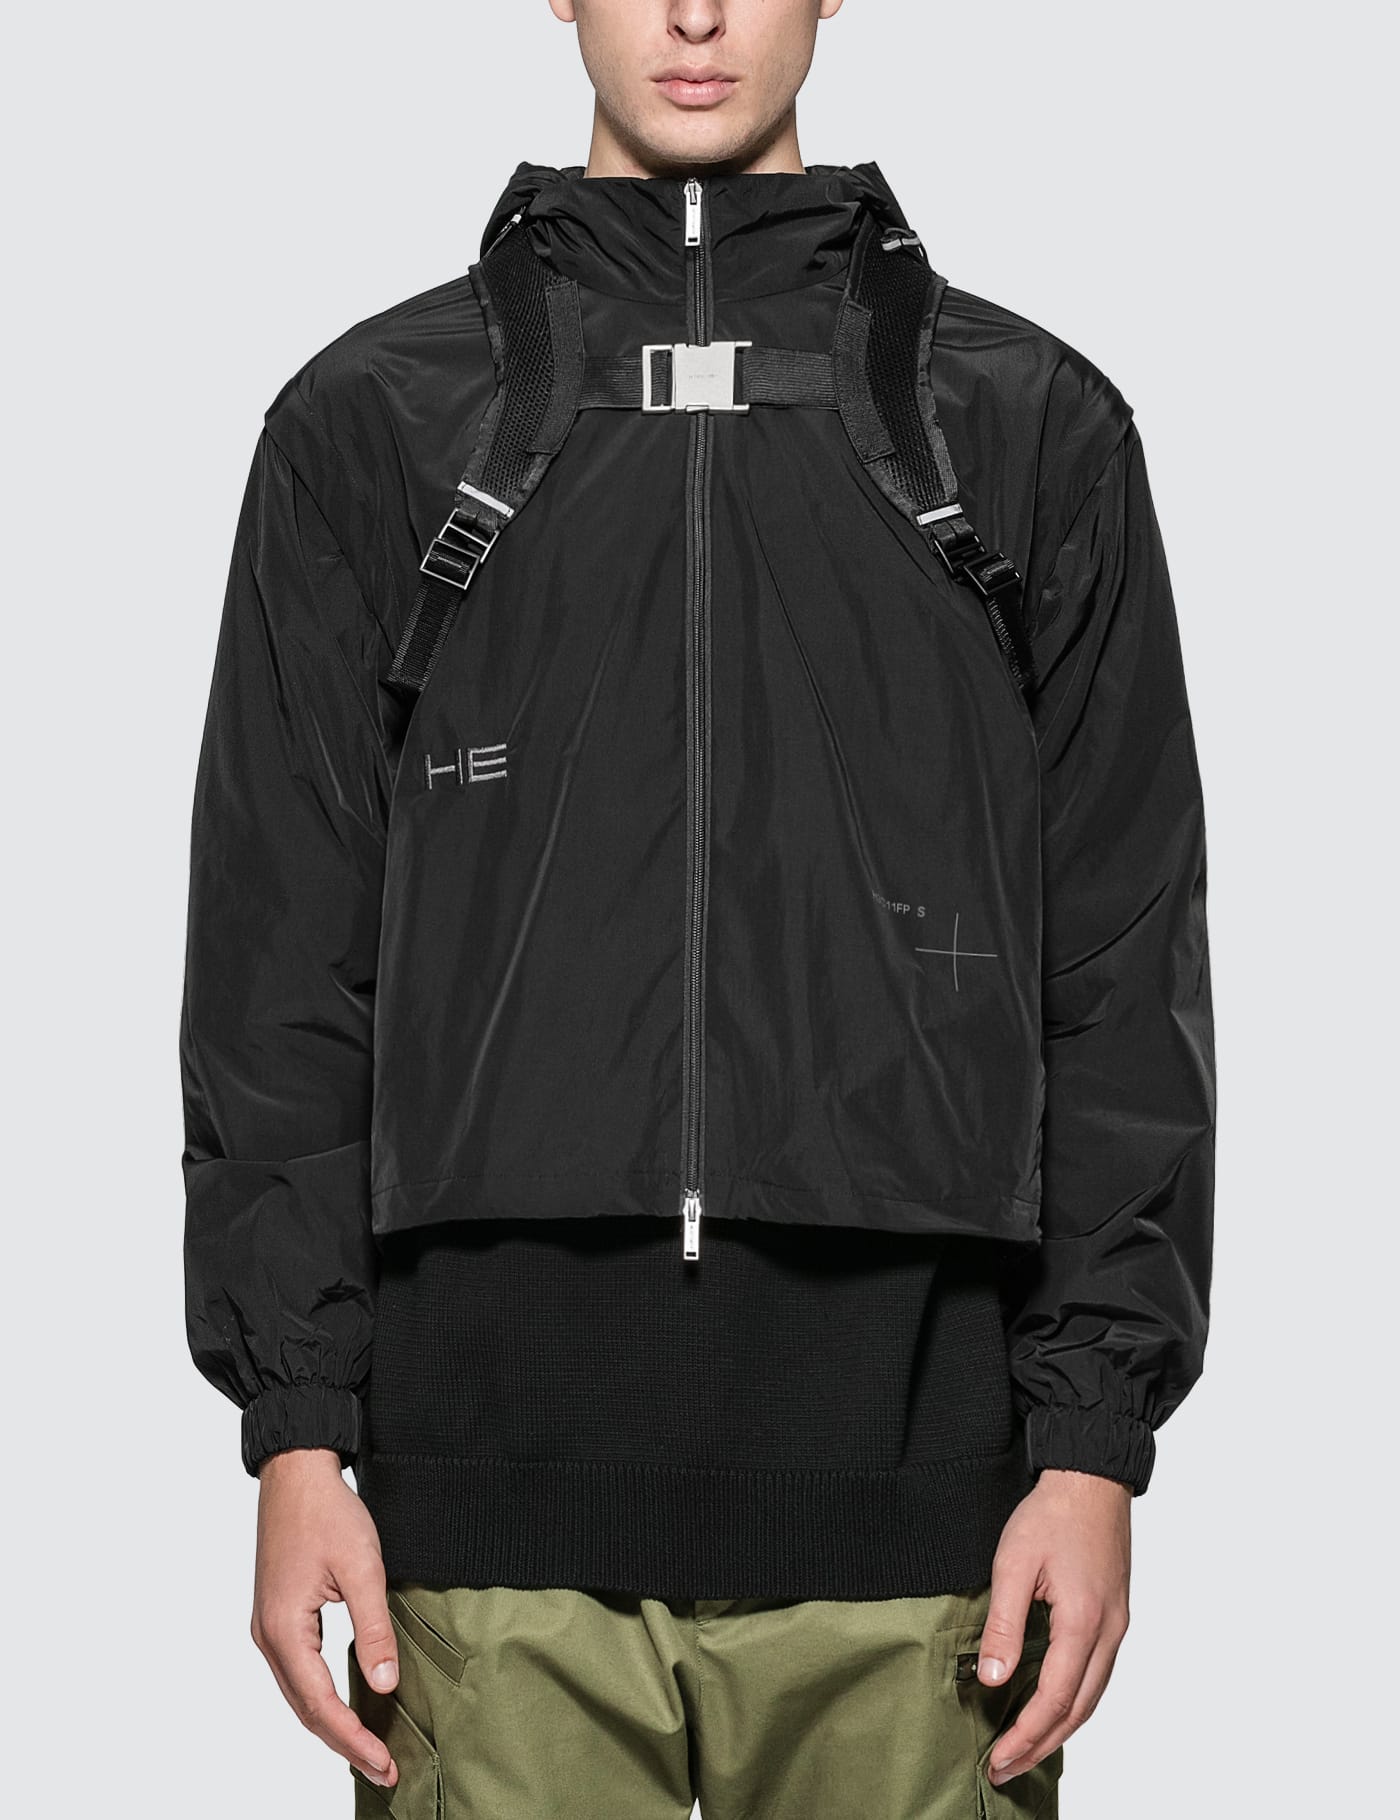 Heliot Emil - Technical Jacket with Vest | HBX - Globally Curated